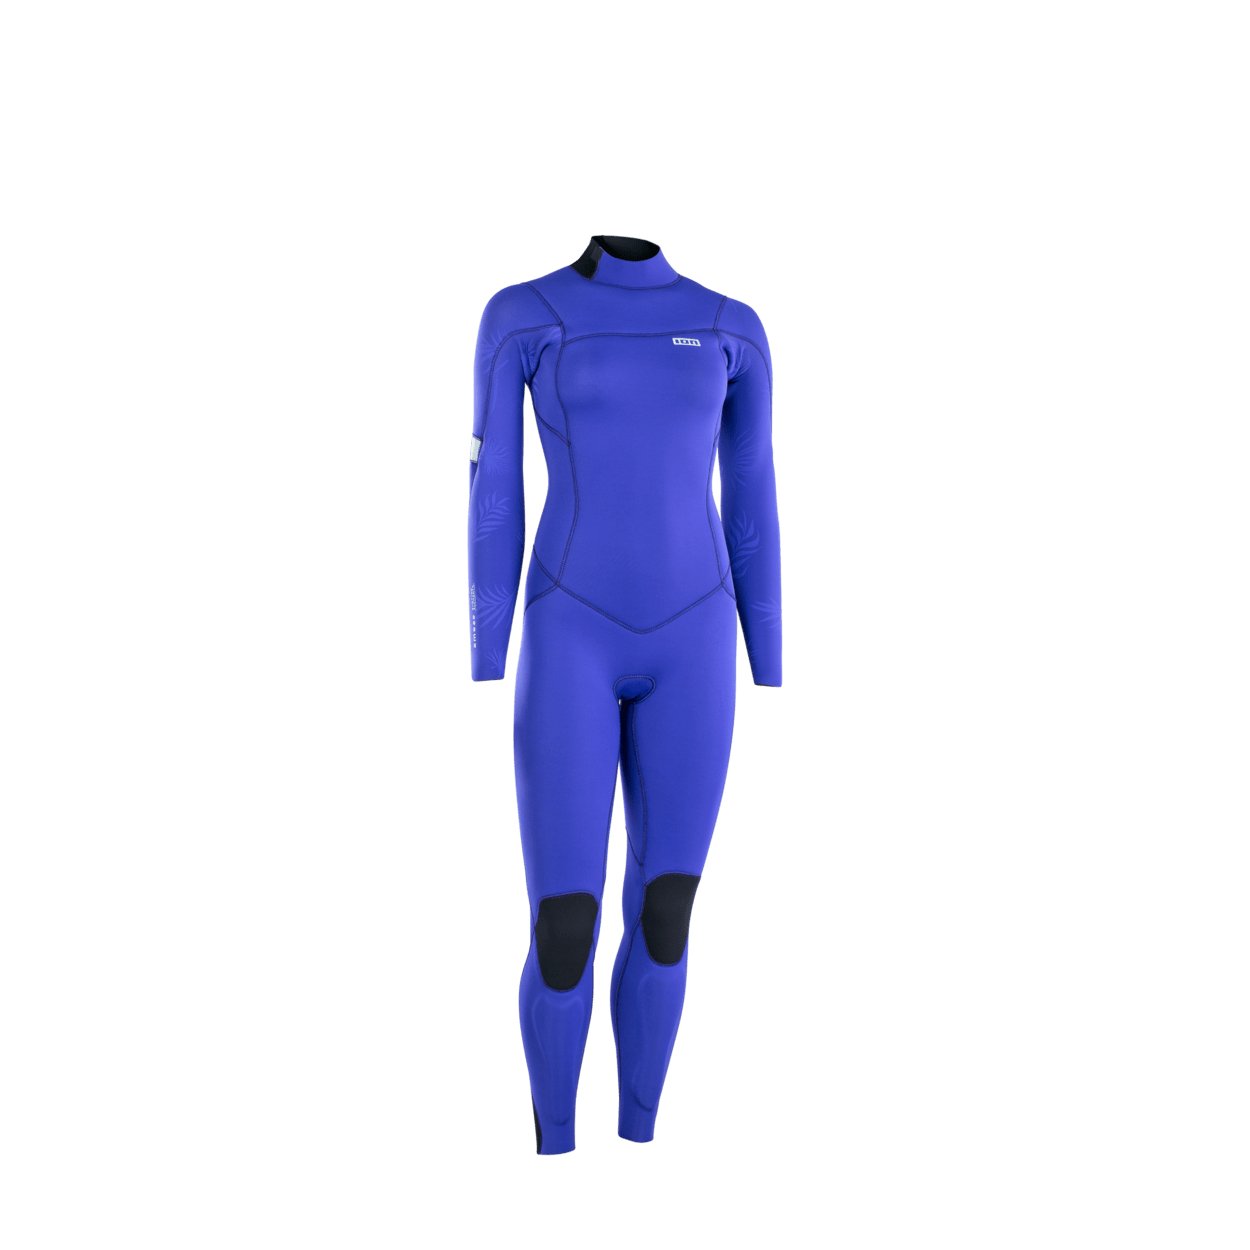 ION Women Wetsuit Amaze Core 5/4 Back Zip 2022 - Worthing Watersports - 9010583057613 - Wetsuits - ION Water